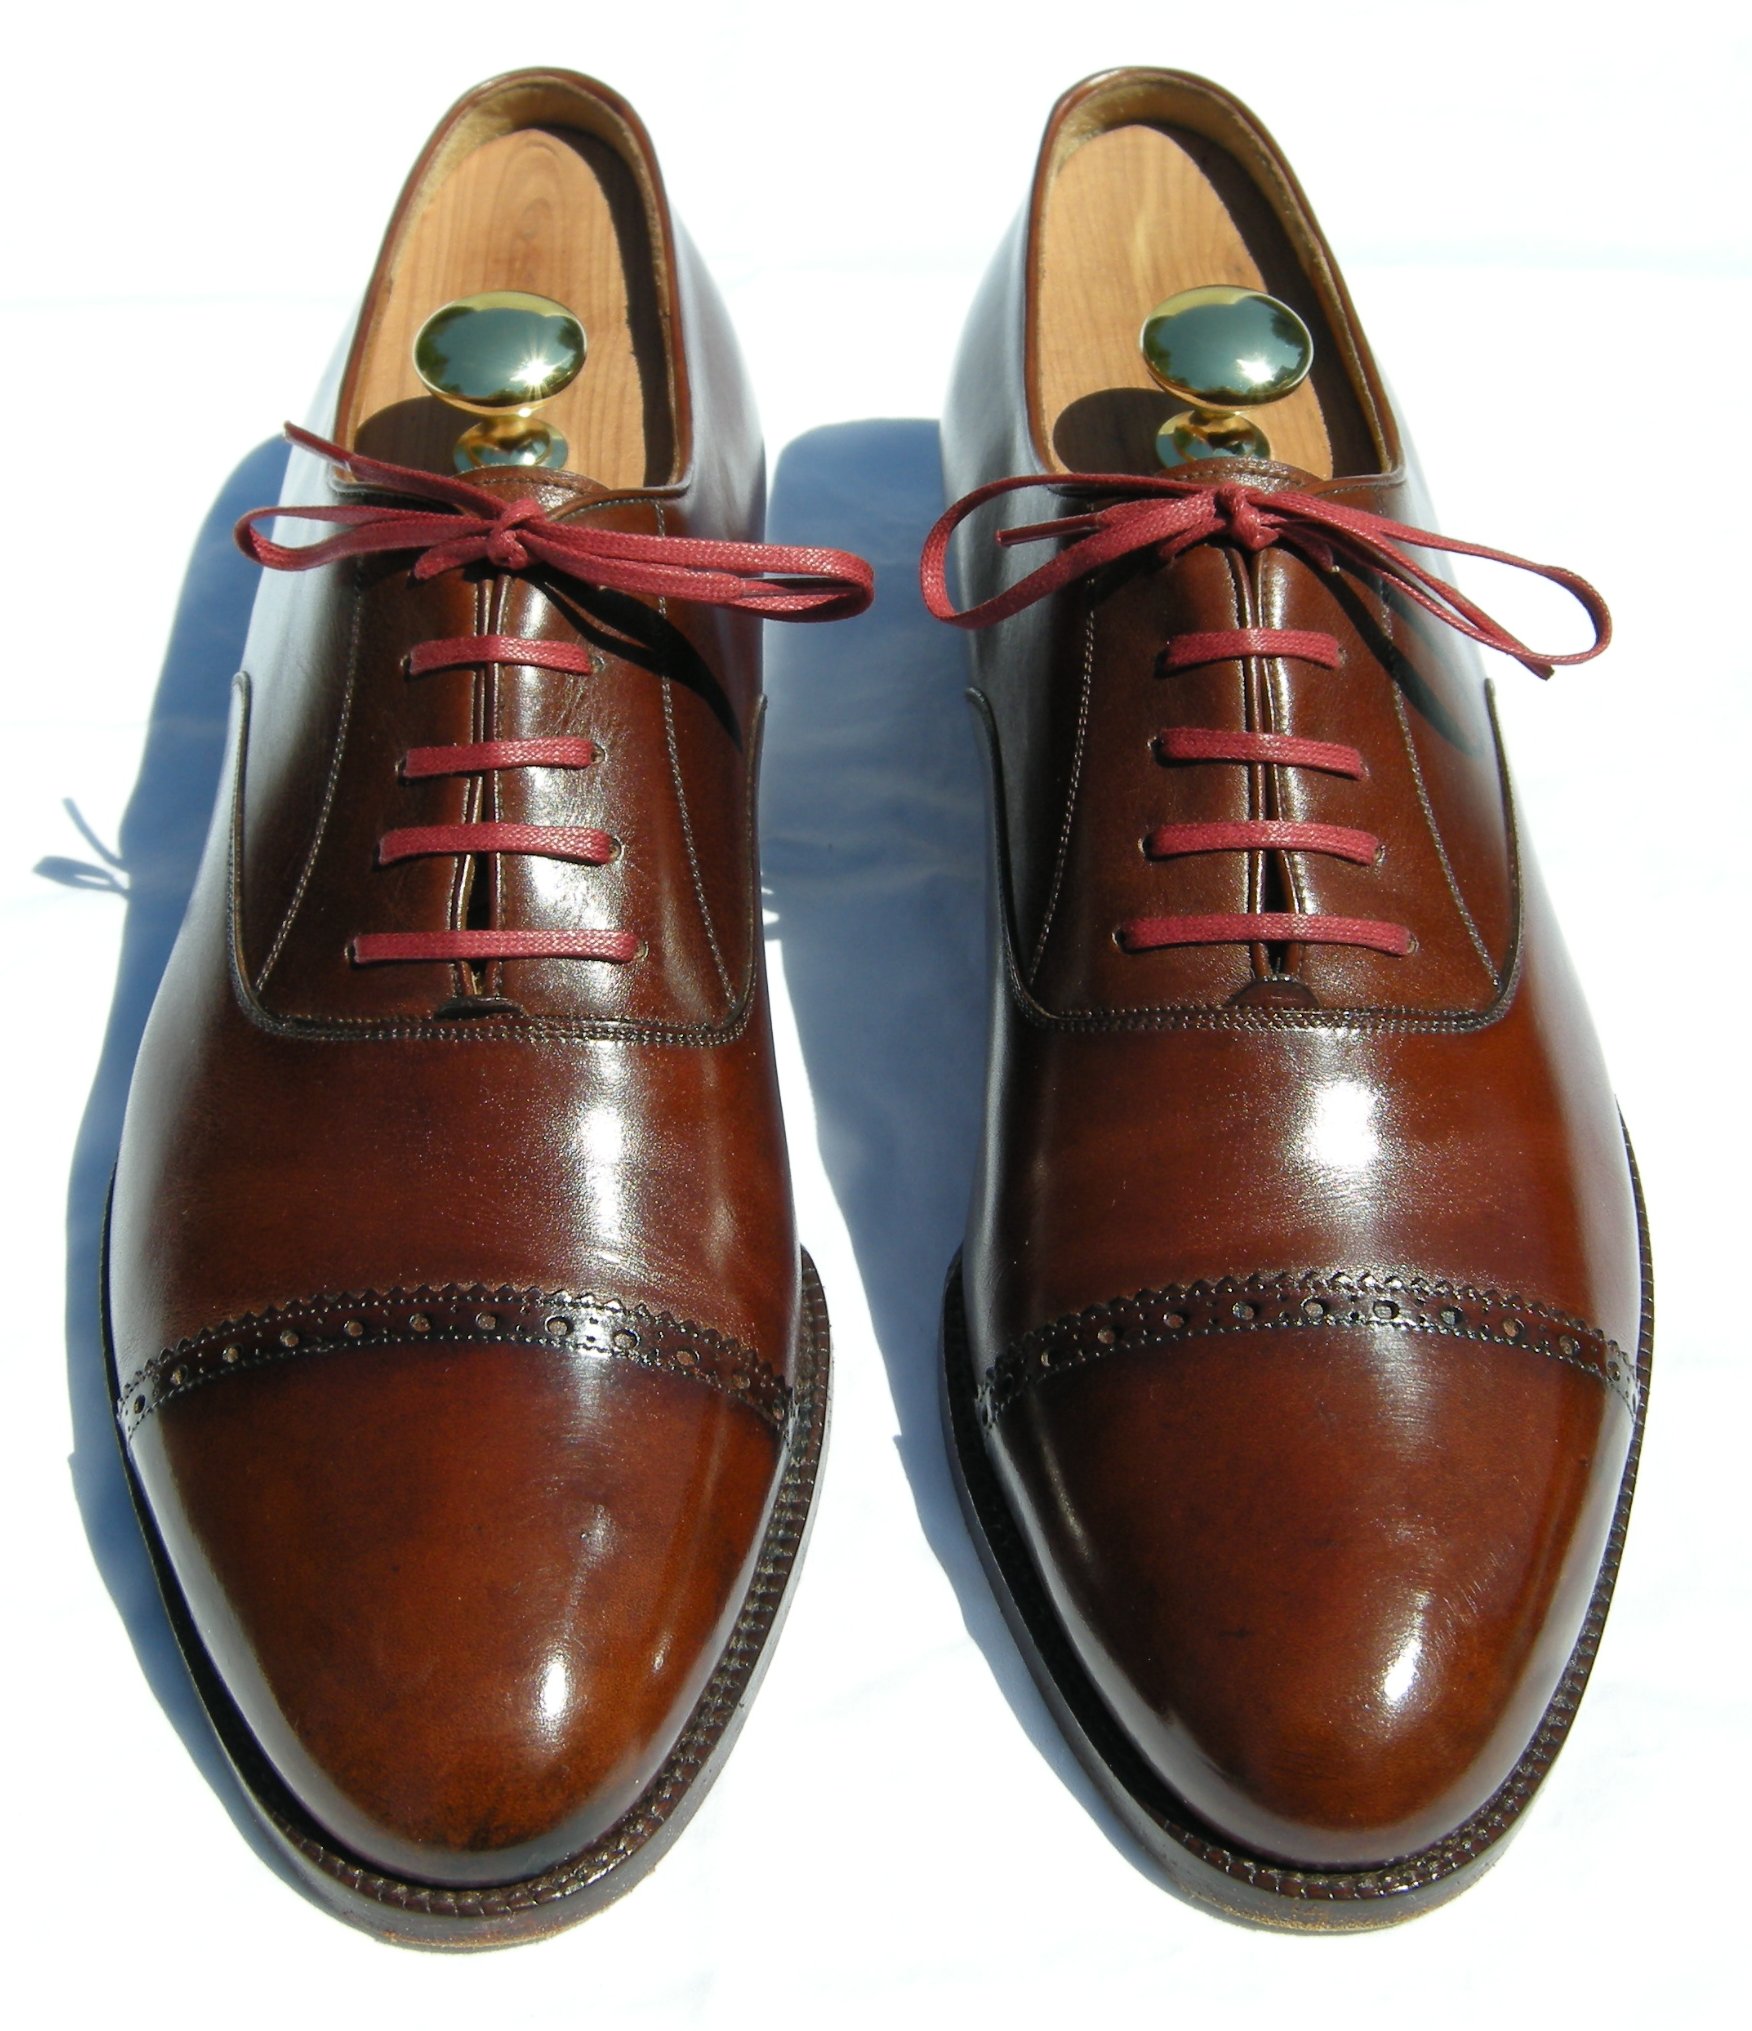 What's the opinion on colored shoe laces for dress shoes? | Styleforum